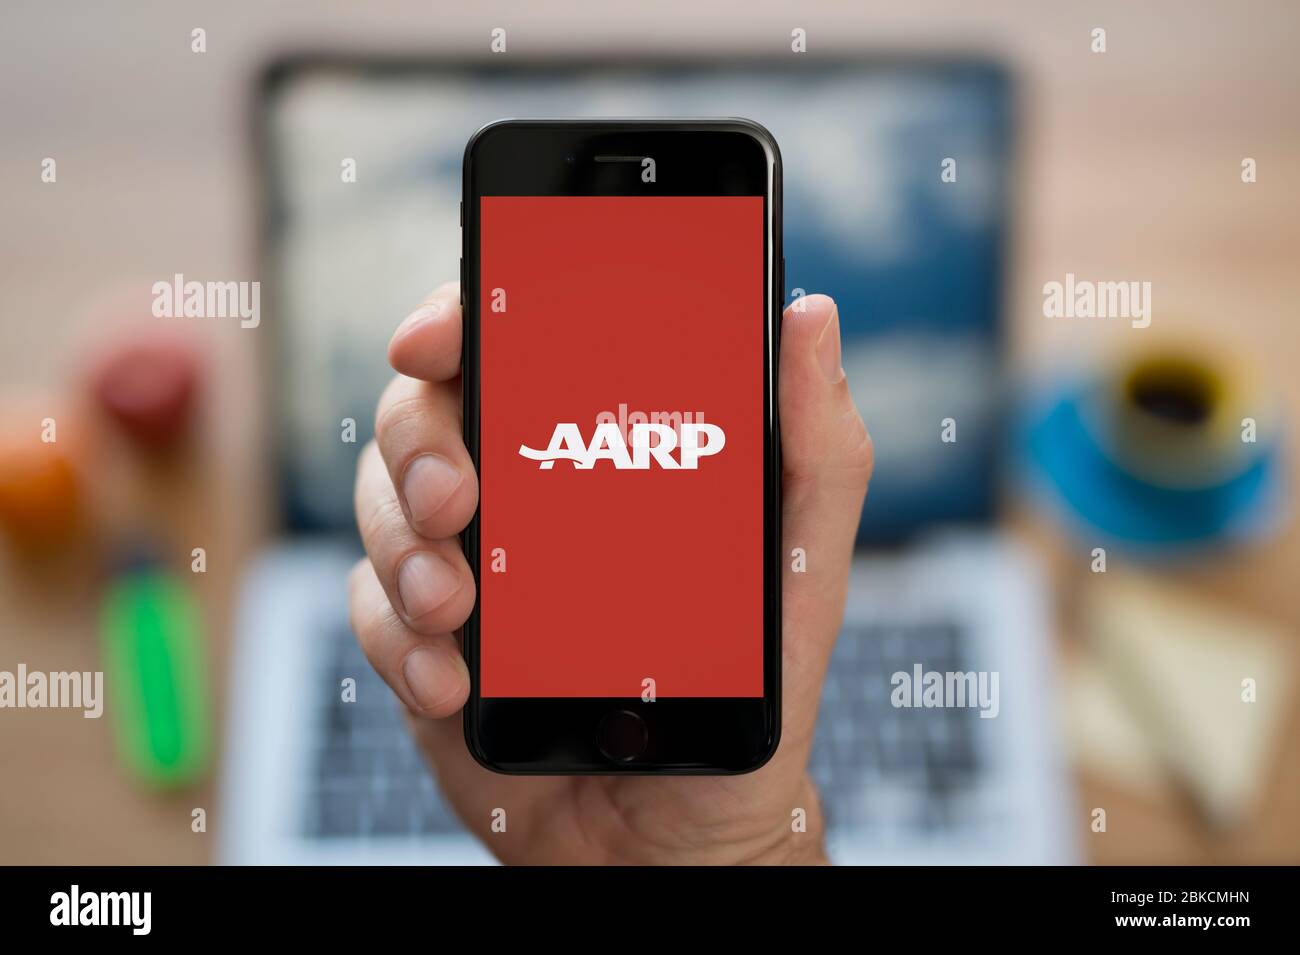 A man looks at his iPhone which displays the AARP logo (Editorial use only). Stock Photo